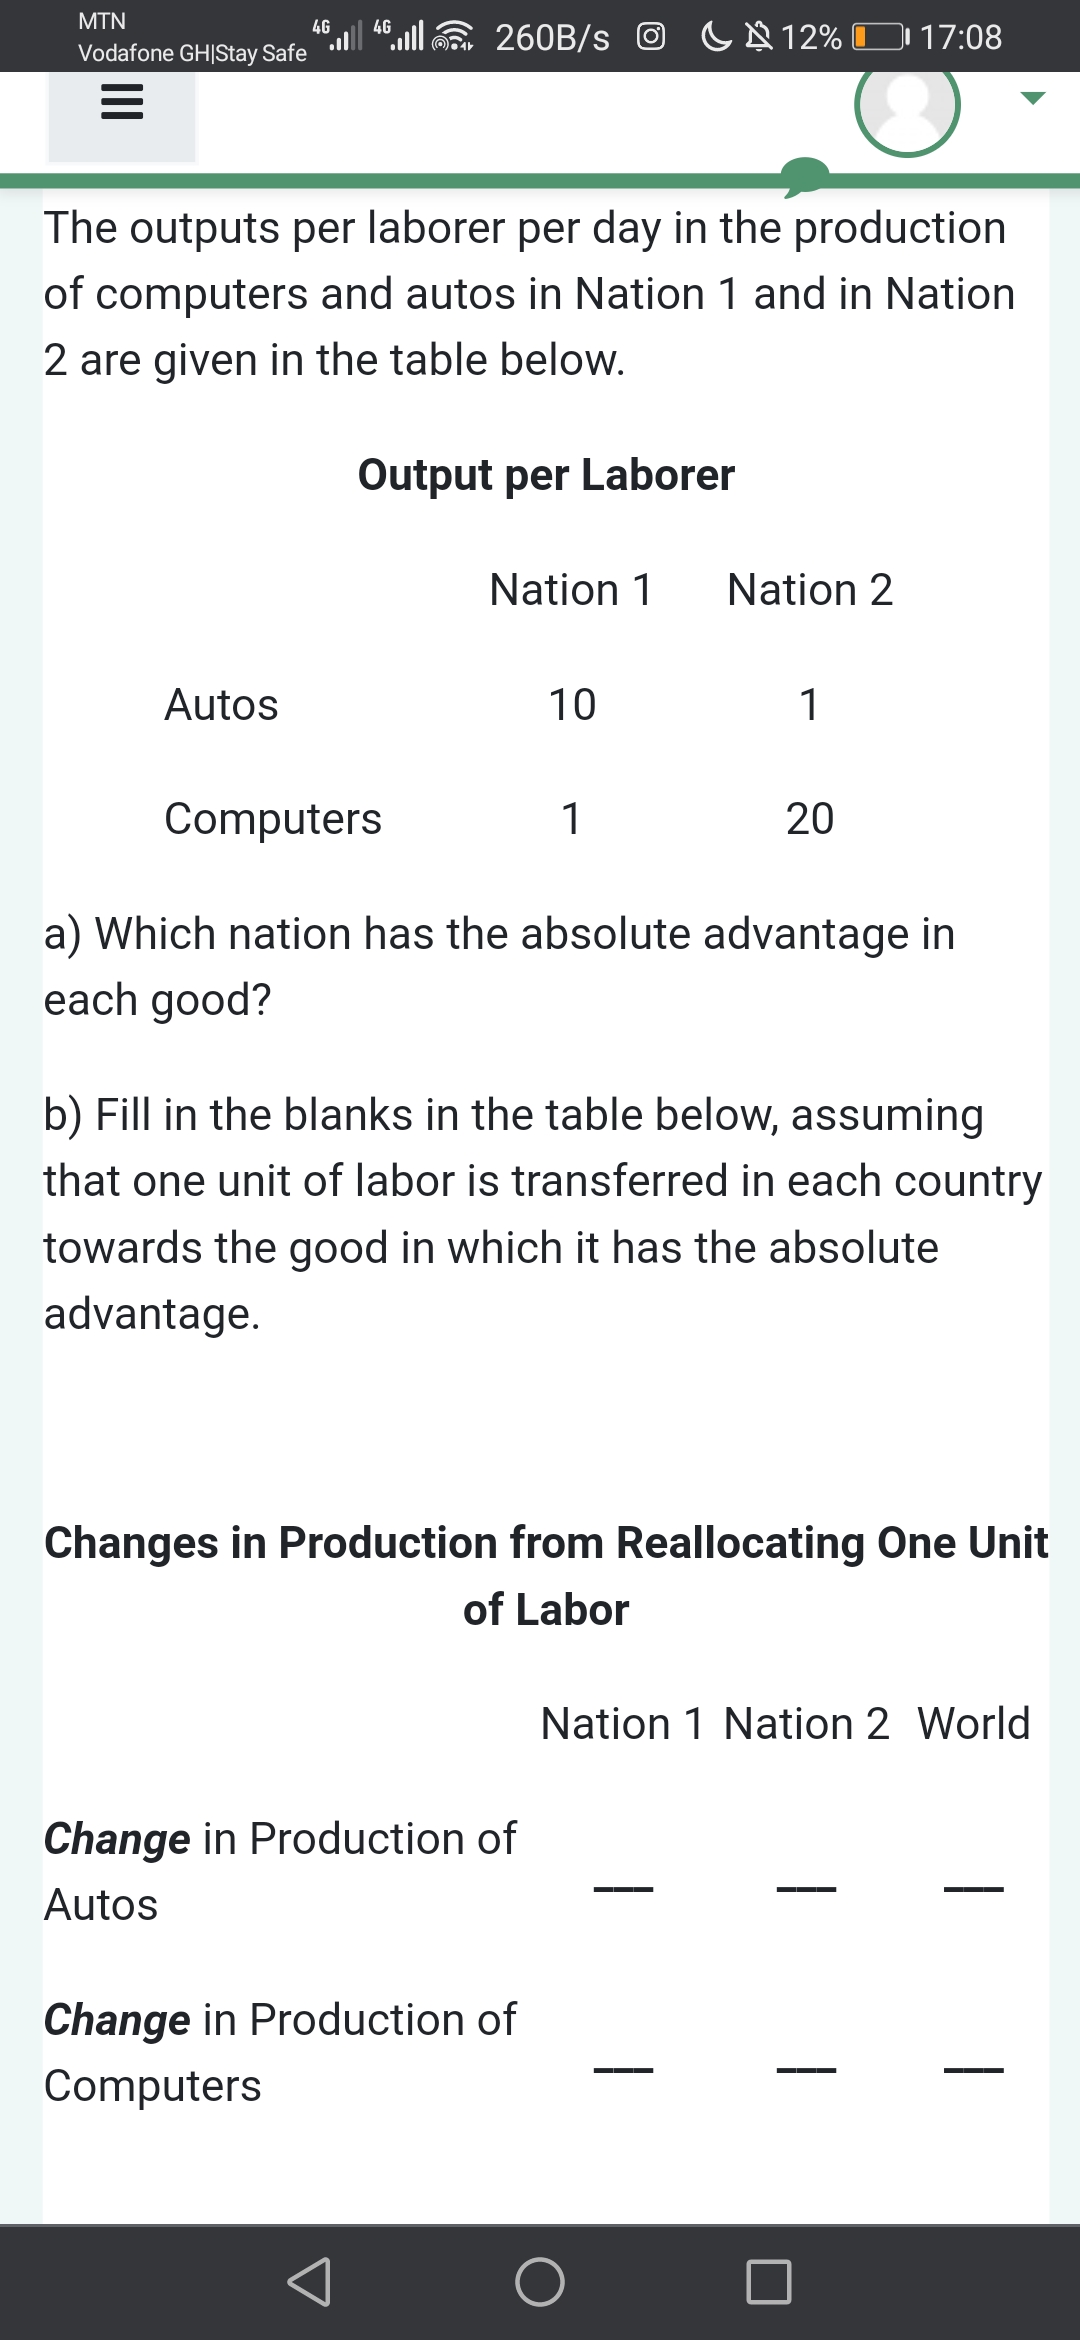 MTN
".|“lE 260B/s O CN 12% O 17:08
4G
4G
Vodafone GH|Stay Safe
The outputs per laborer per day in the production
of computers and autos in Nation 1 and in Nation
2 are given in the table below.
Output per Laborer
Nation 1
Nation 2
Autos
10
1
Computers
1
20
a) Which nation has the absolute advantage in
each good?
b) Fill in the blanks in the table below, assuming
that one unit of labor is transferred in each country
towards the good in which it has the absolute
advantage.
Changes in Production from Reallocating One Unit
of Labor
Nation 1 Nation 2 World
Change in Production of
Autos
Change in Production of
Computers
|
